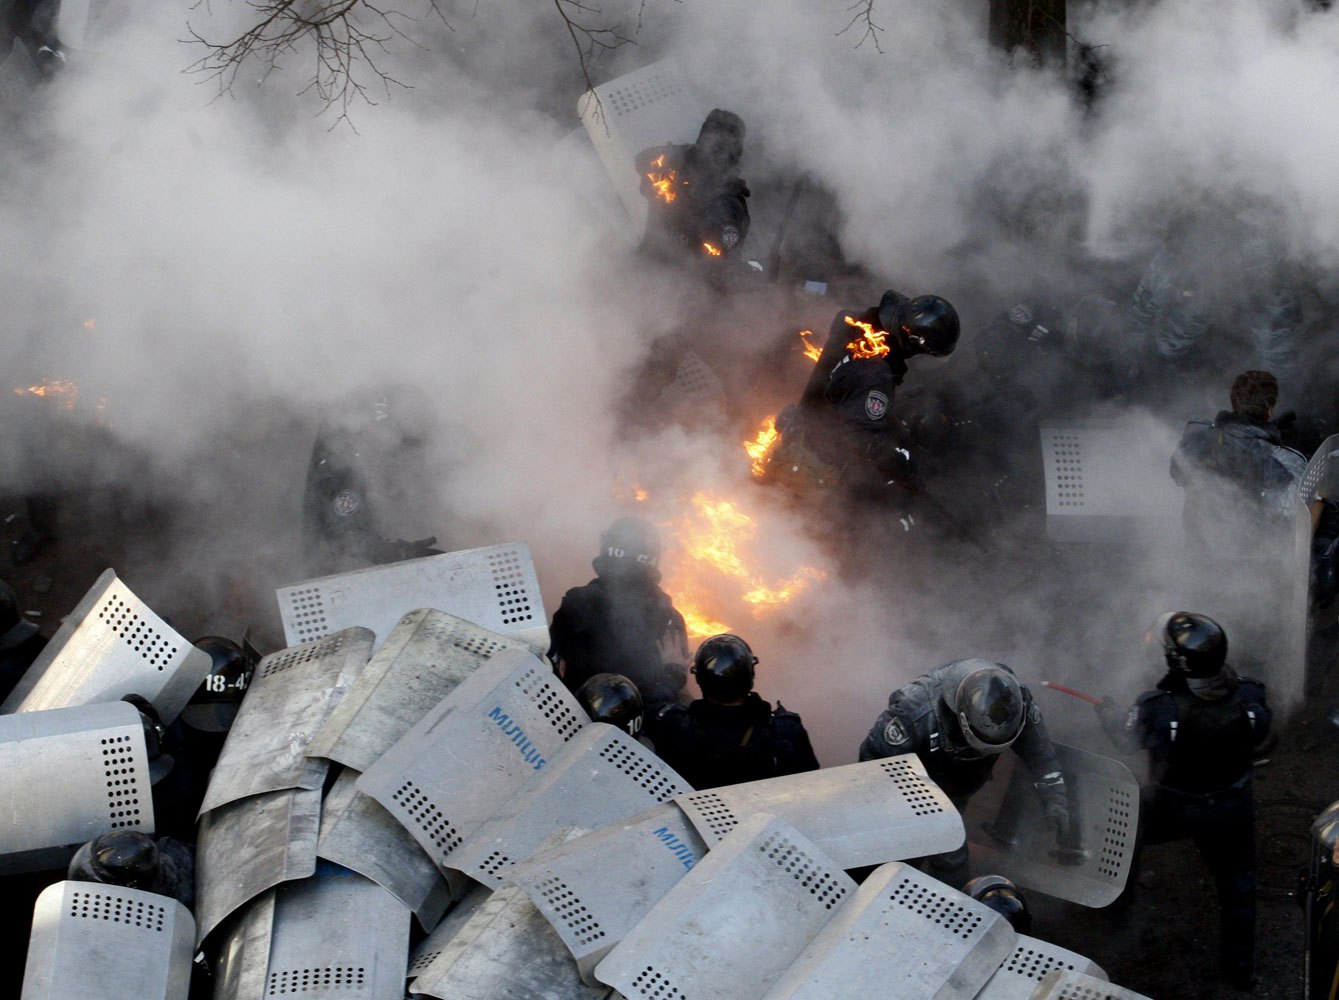 Policemen run amid flames during clashes with anti-government protesters in front of the Ukrainian Parliament in Kiev, on Feb. 18, 2014.